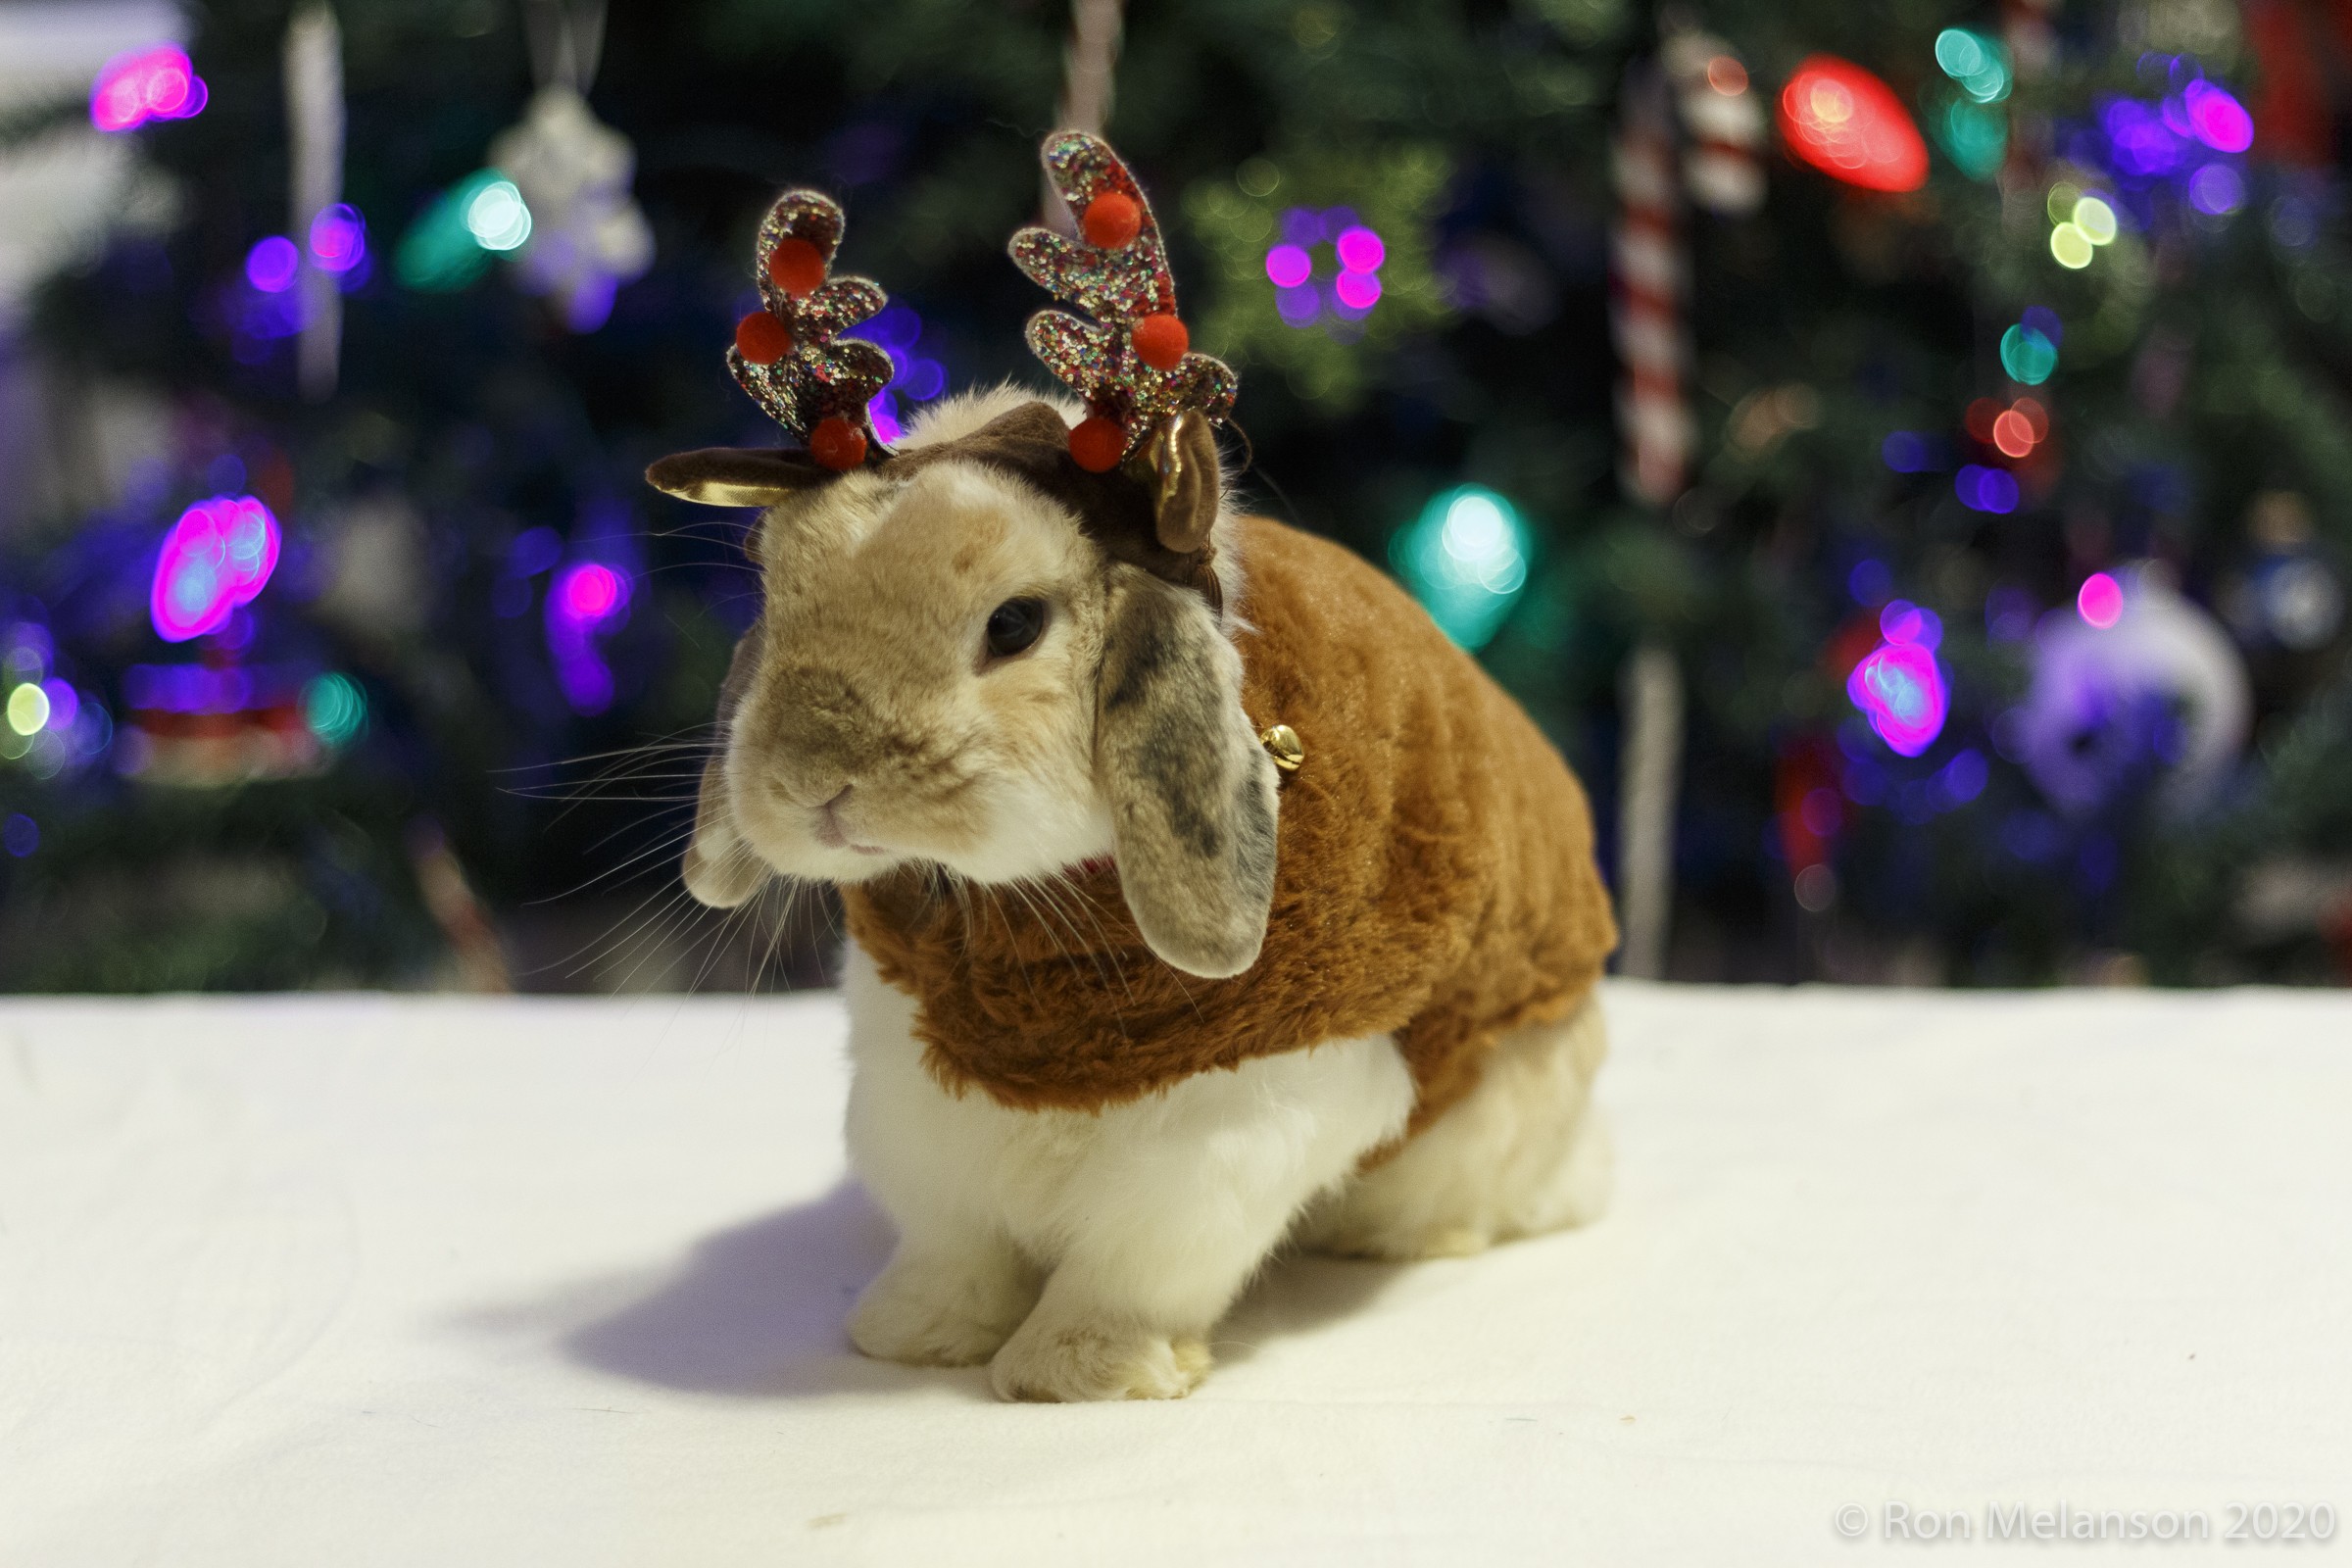 Butters the bunny in Christmas costume